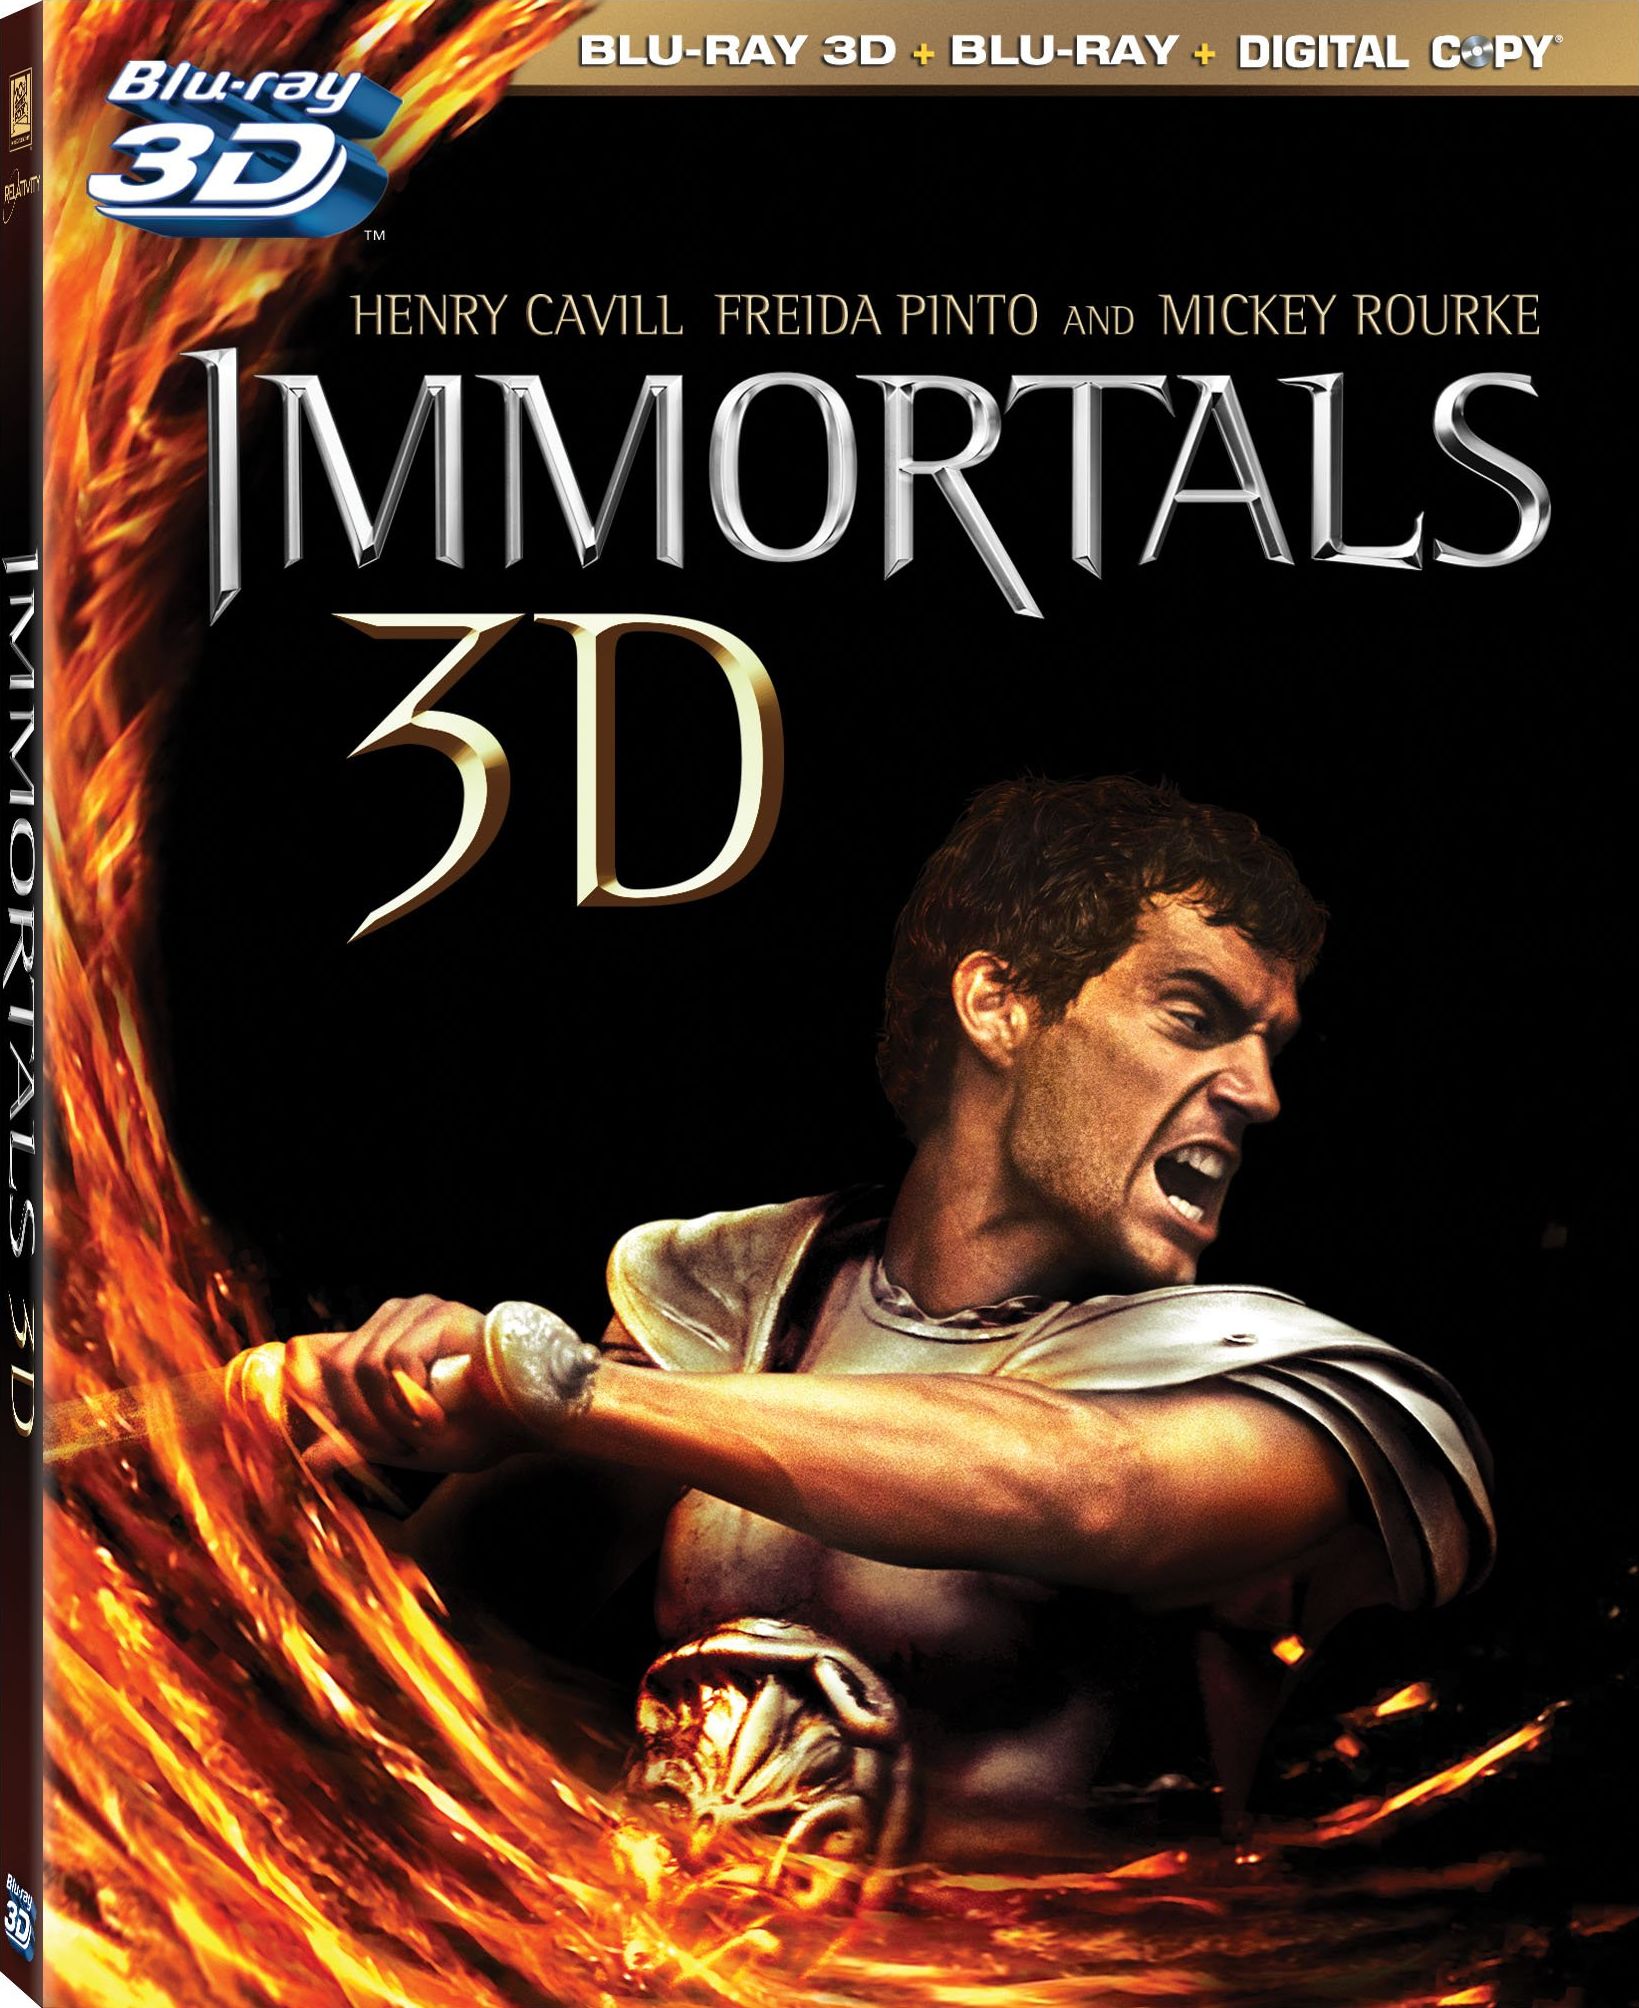 Immortals DVD Release Date March 6, 2012